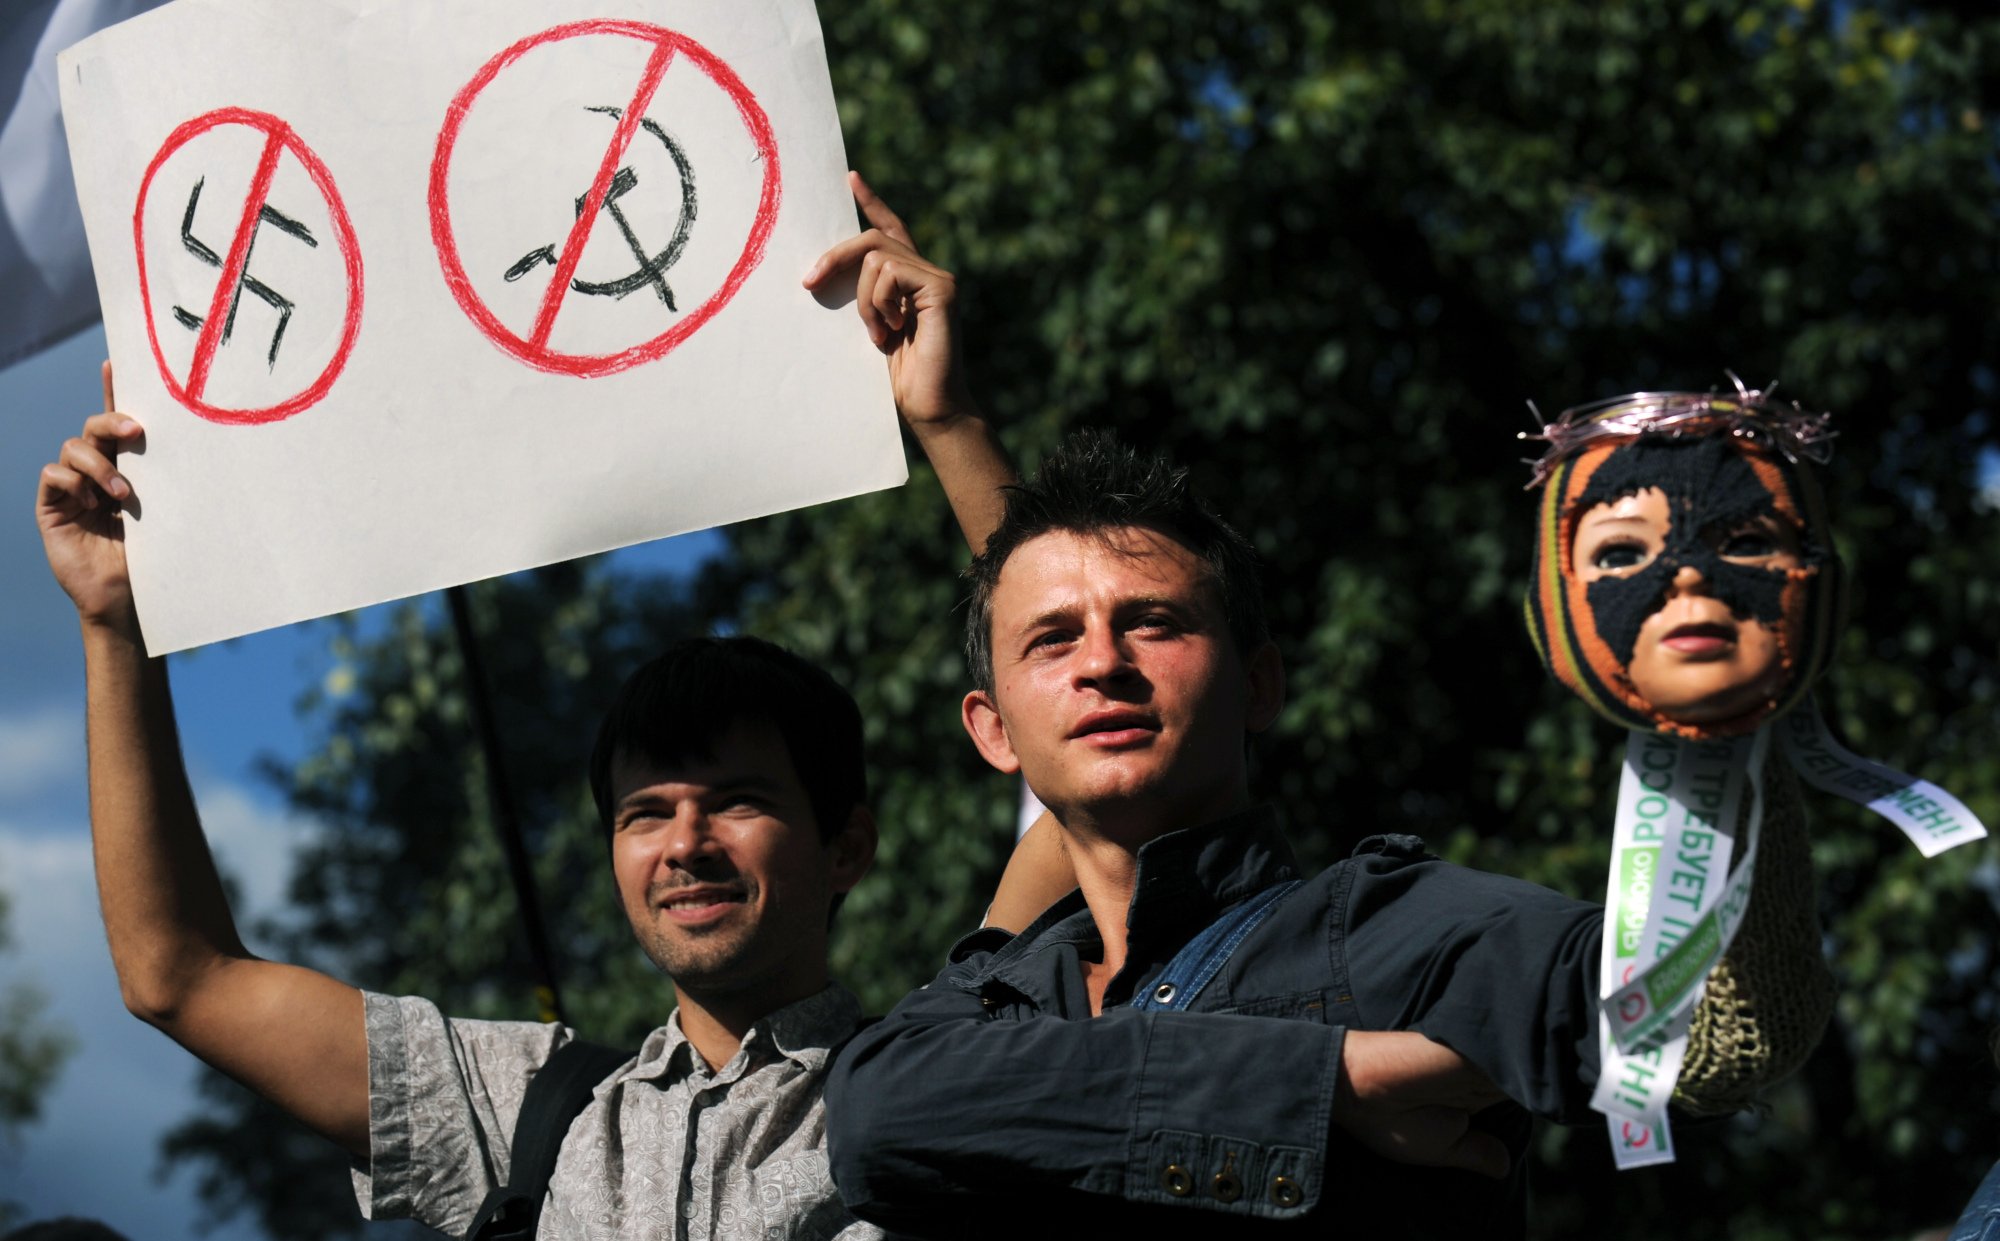 No to fascism, no to communism: Russian opposition supporters hold a puppet's head wearing a balaclava, trademark of the feminist punk band Pussy Riot, during a commemorative event for the victims of the 1991 coup in Moscow on Aug. 19, 2012